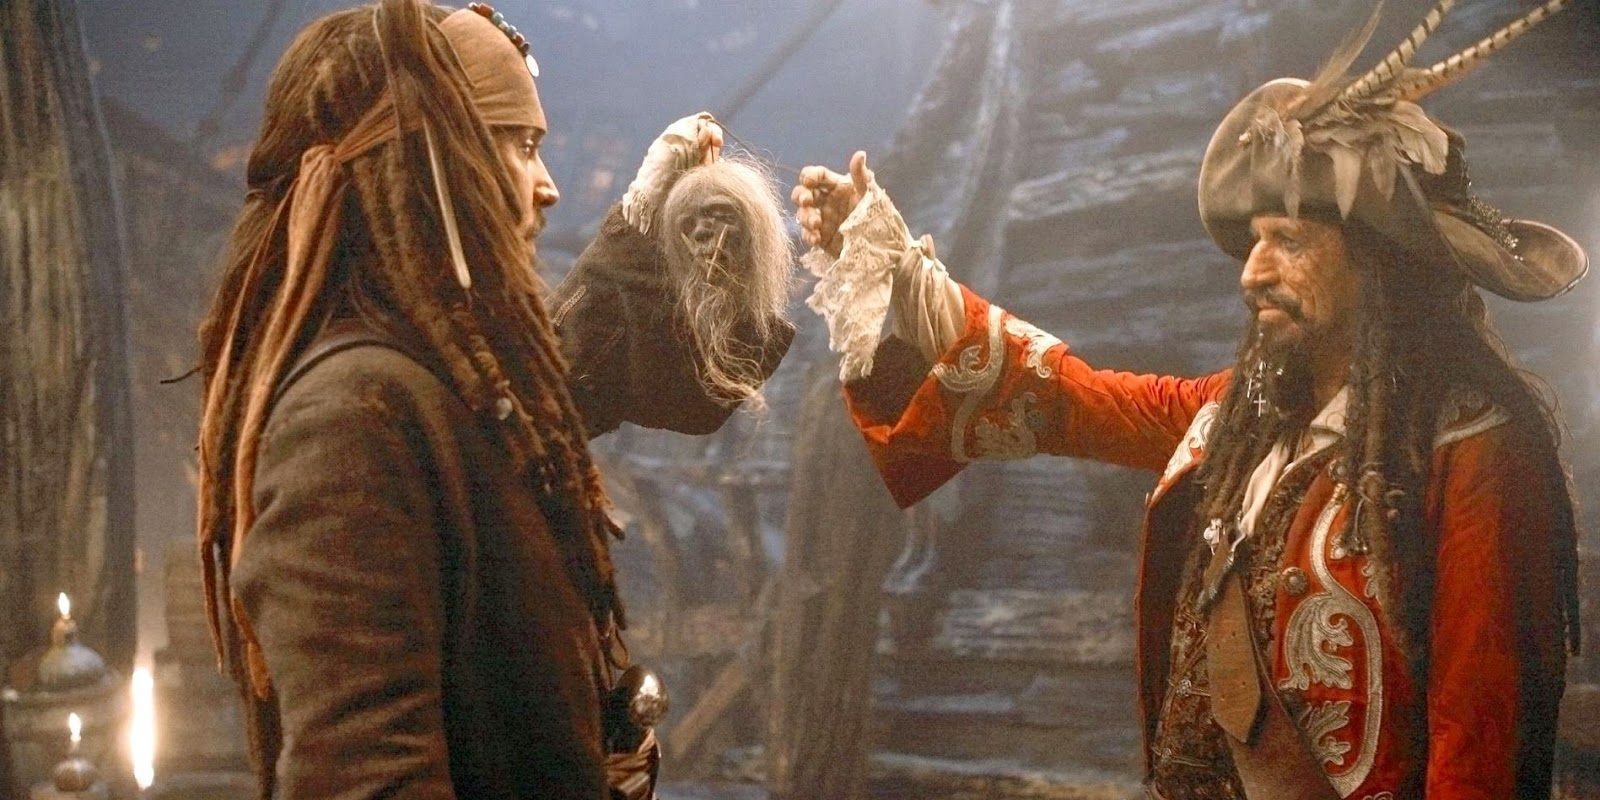 Jack Sparrow looks at a shrunken head given to him by his father